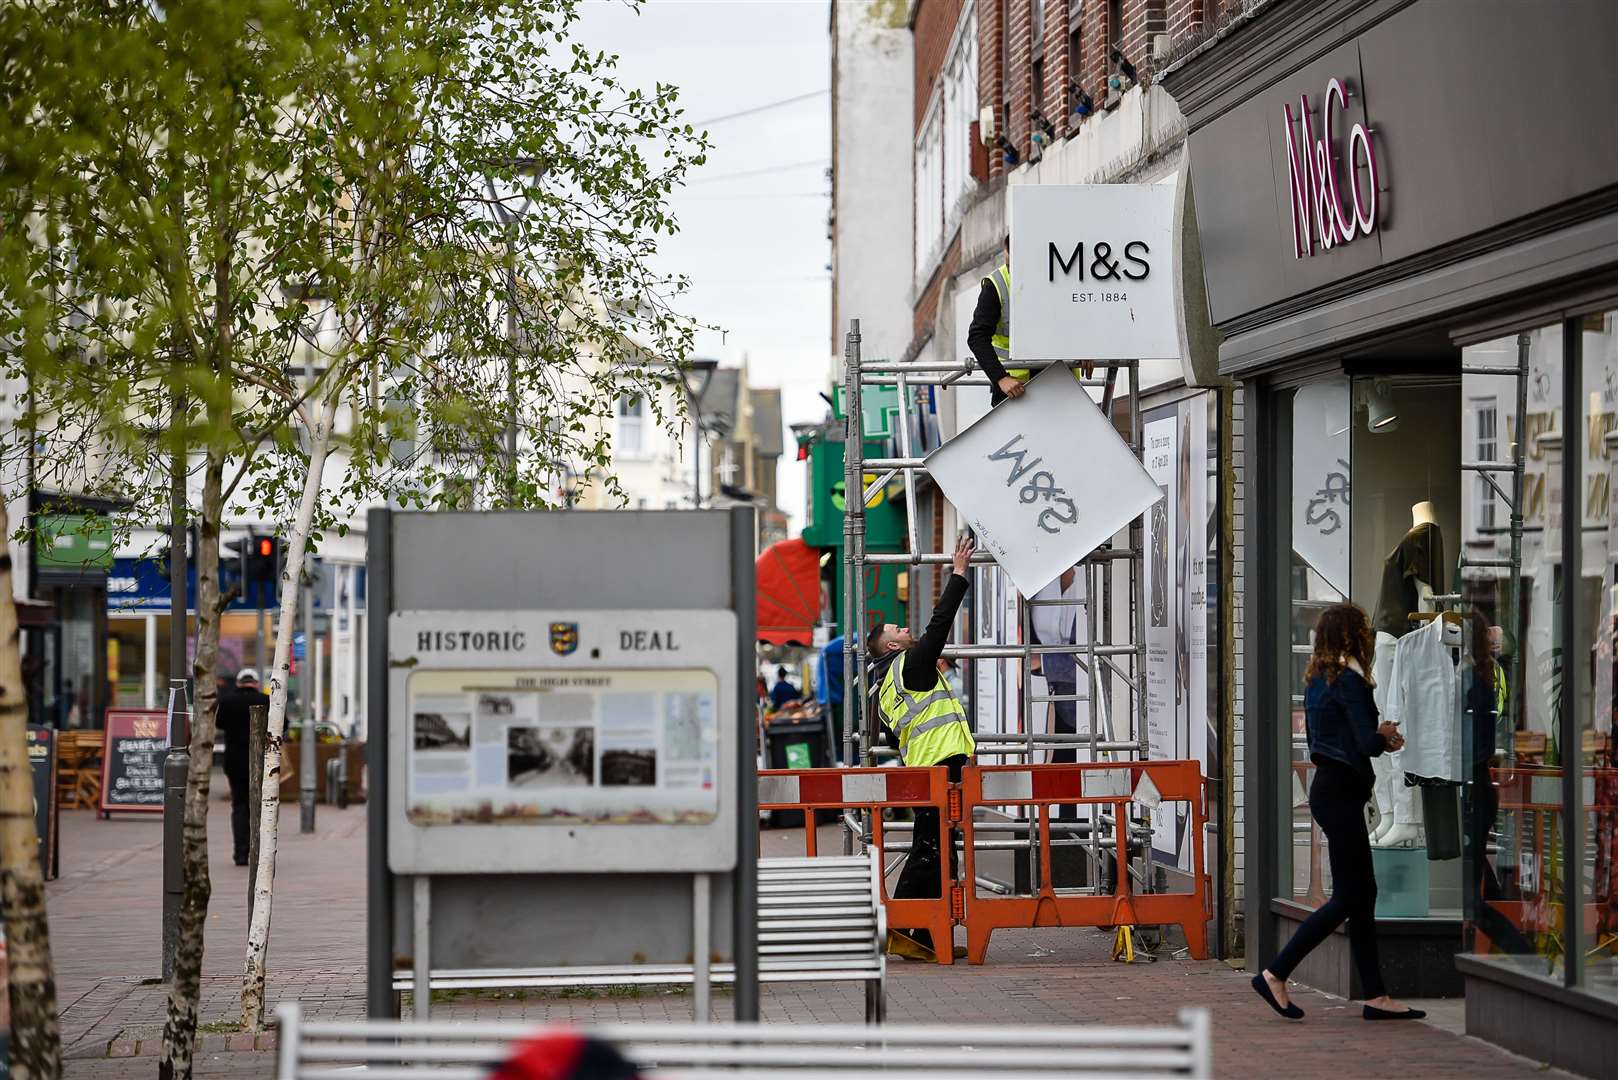 M&S in Deal High Street closed on April 27, 2019 and its signs were removed the same day Picture: Alan Langley